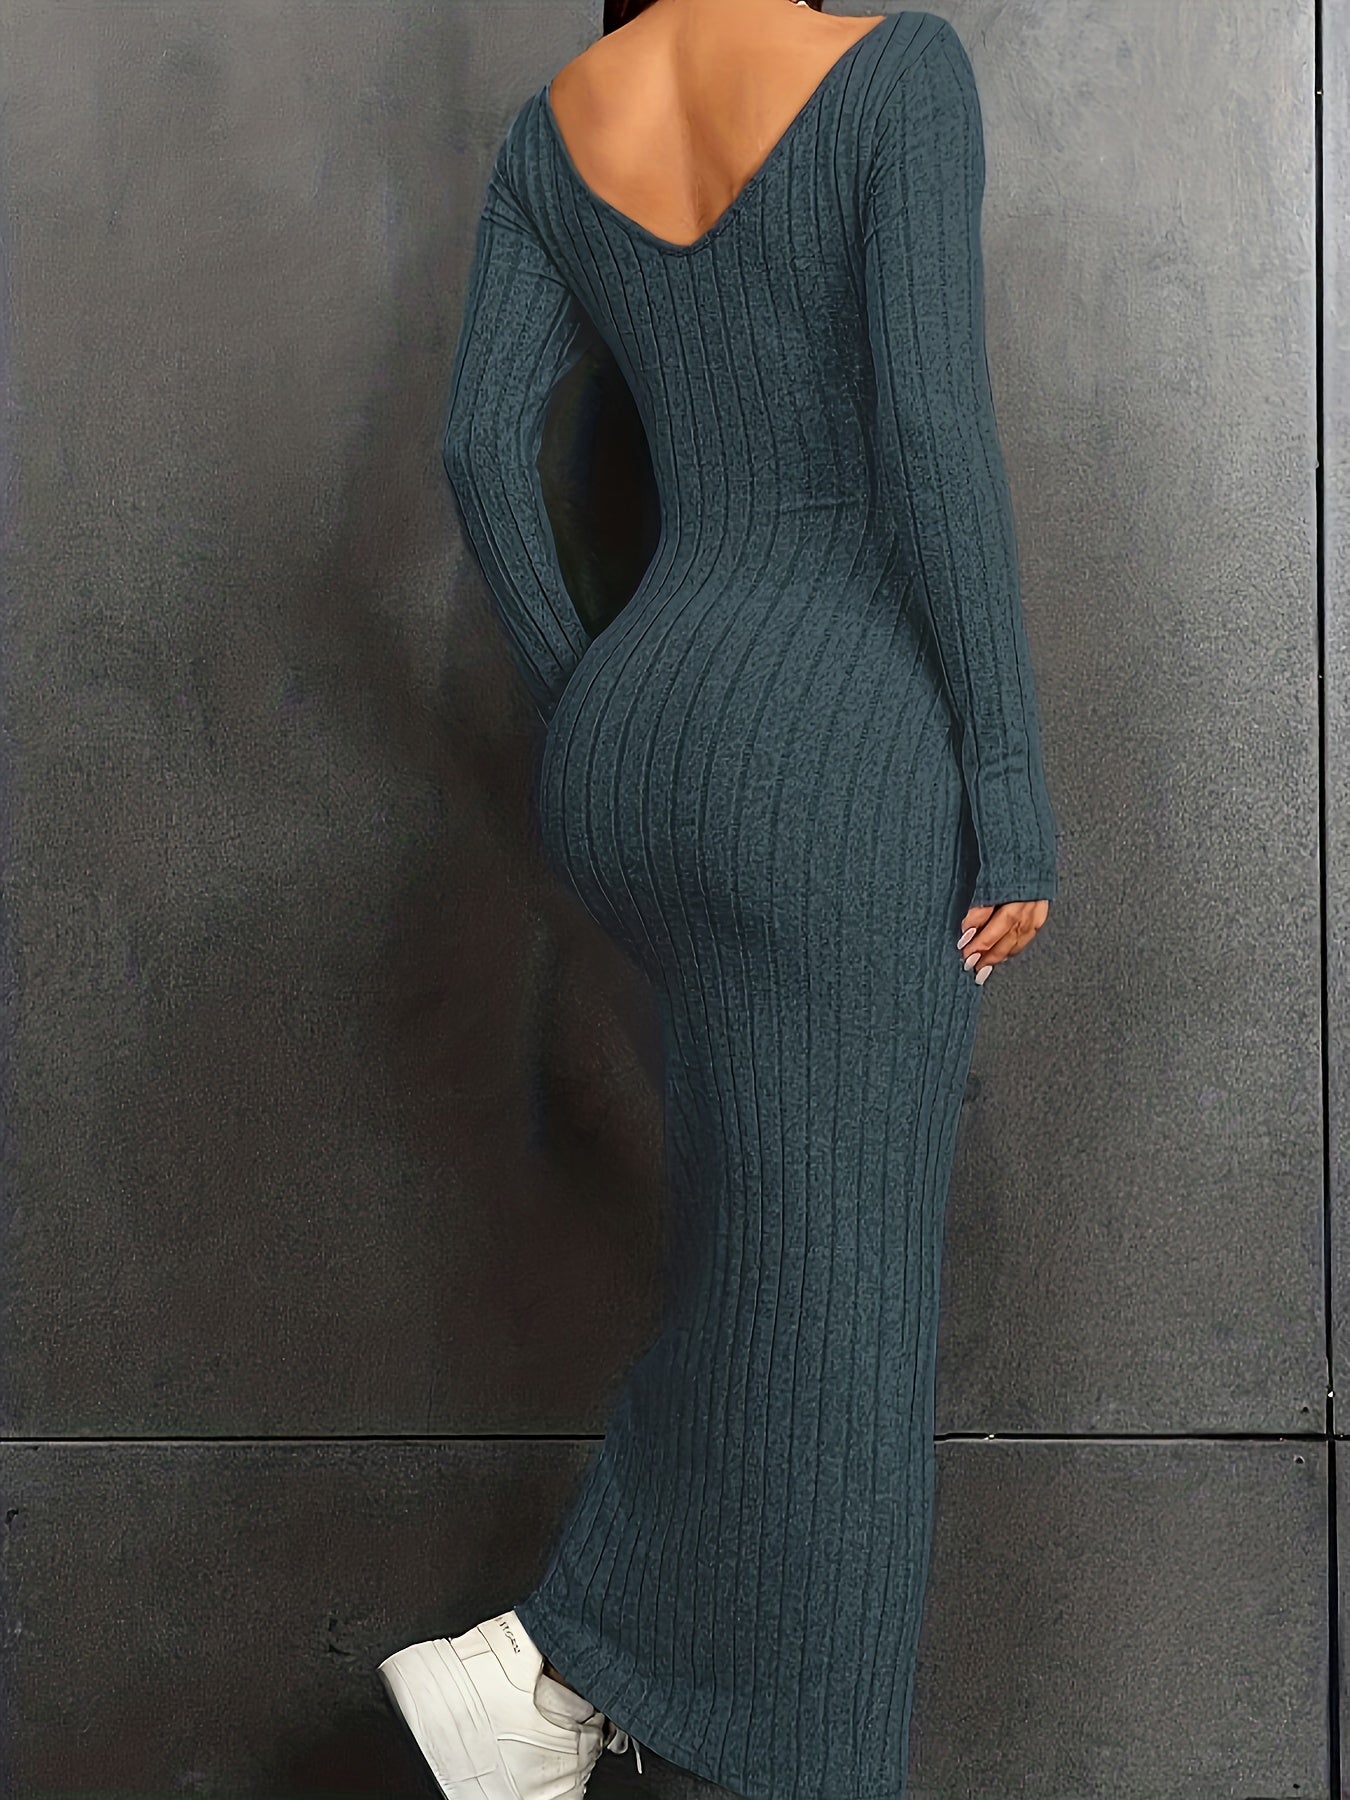 Antmvs Ribbed Backless Dress, Casual Long Sleeve Bodycon Dress, Women's Clothing